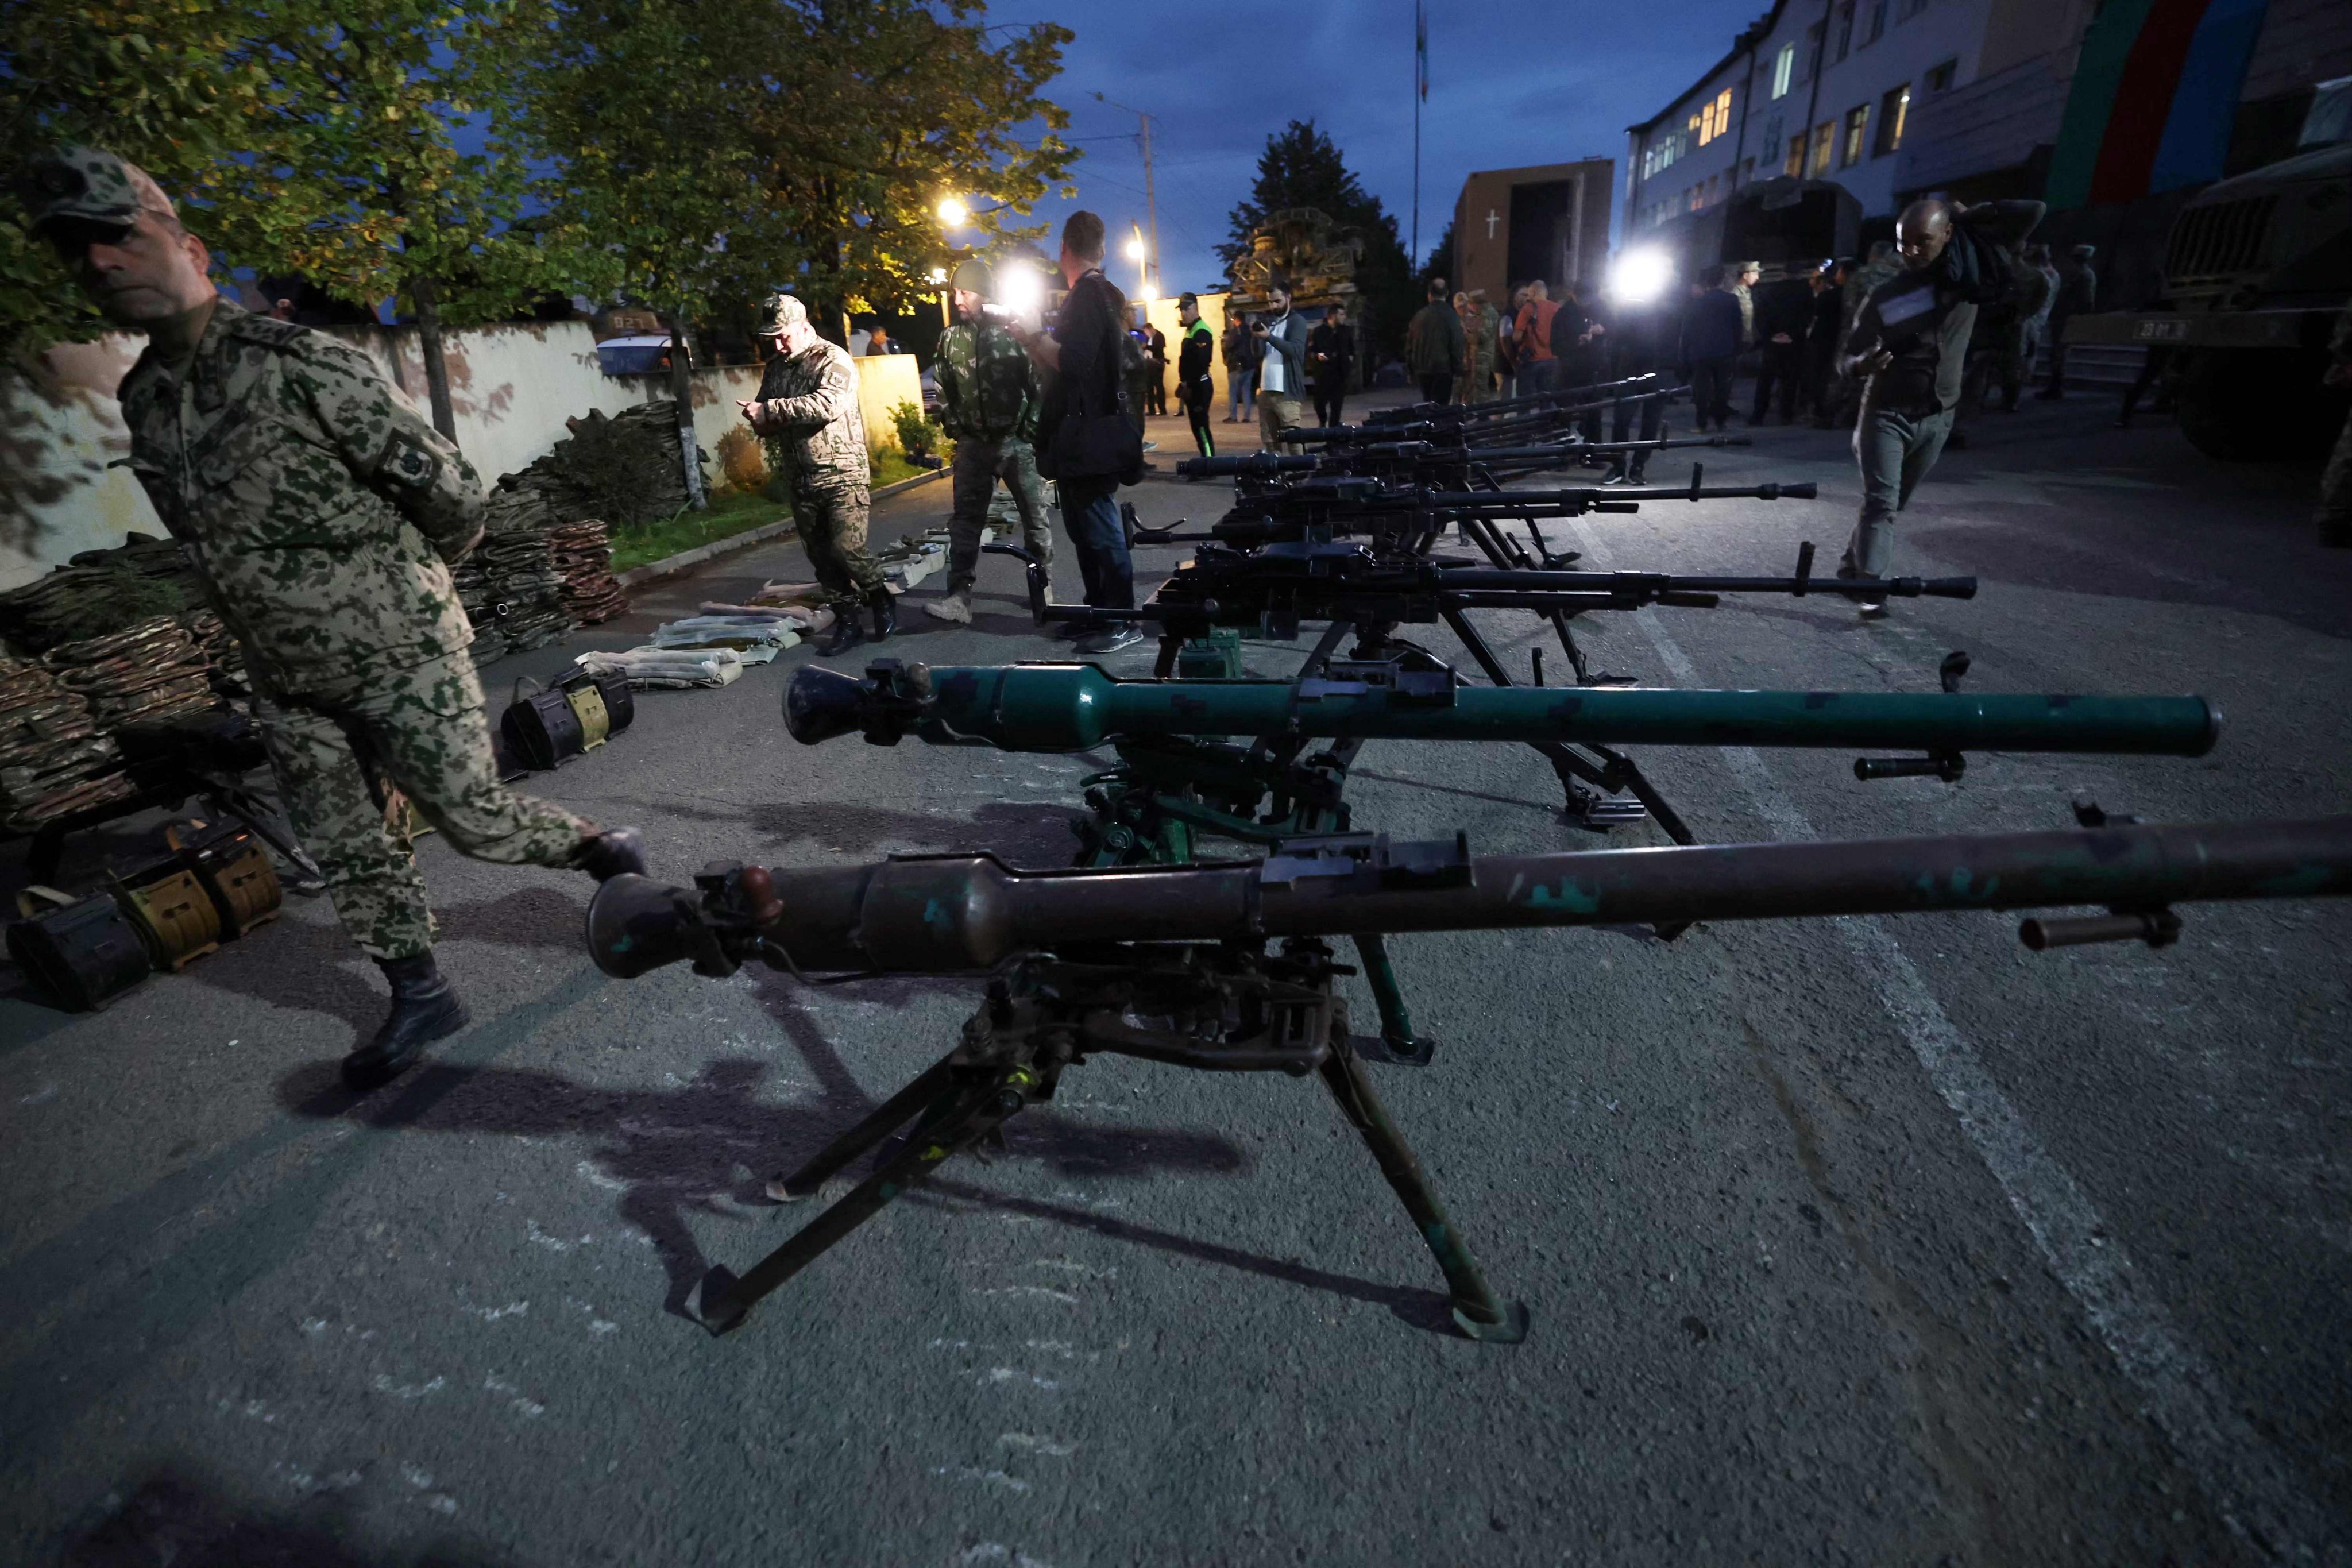 Artillery seized from Nagorno-Karabakh forces is displayed for the press in Shusha on Saturday. Photo: AFP